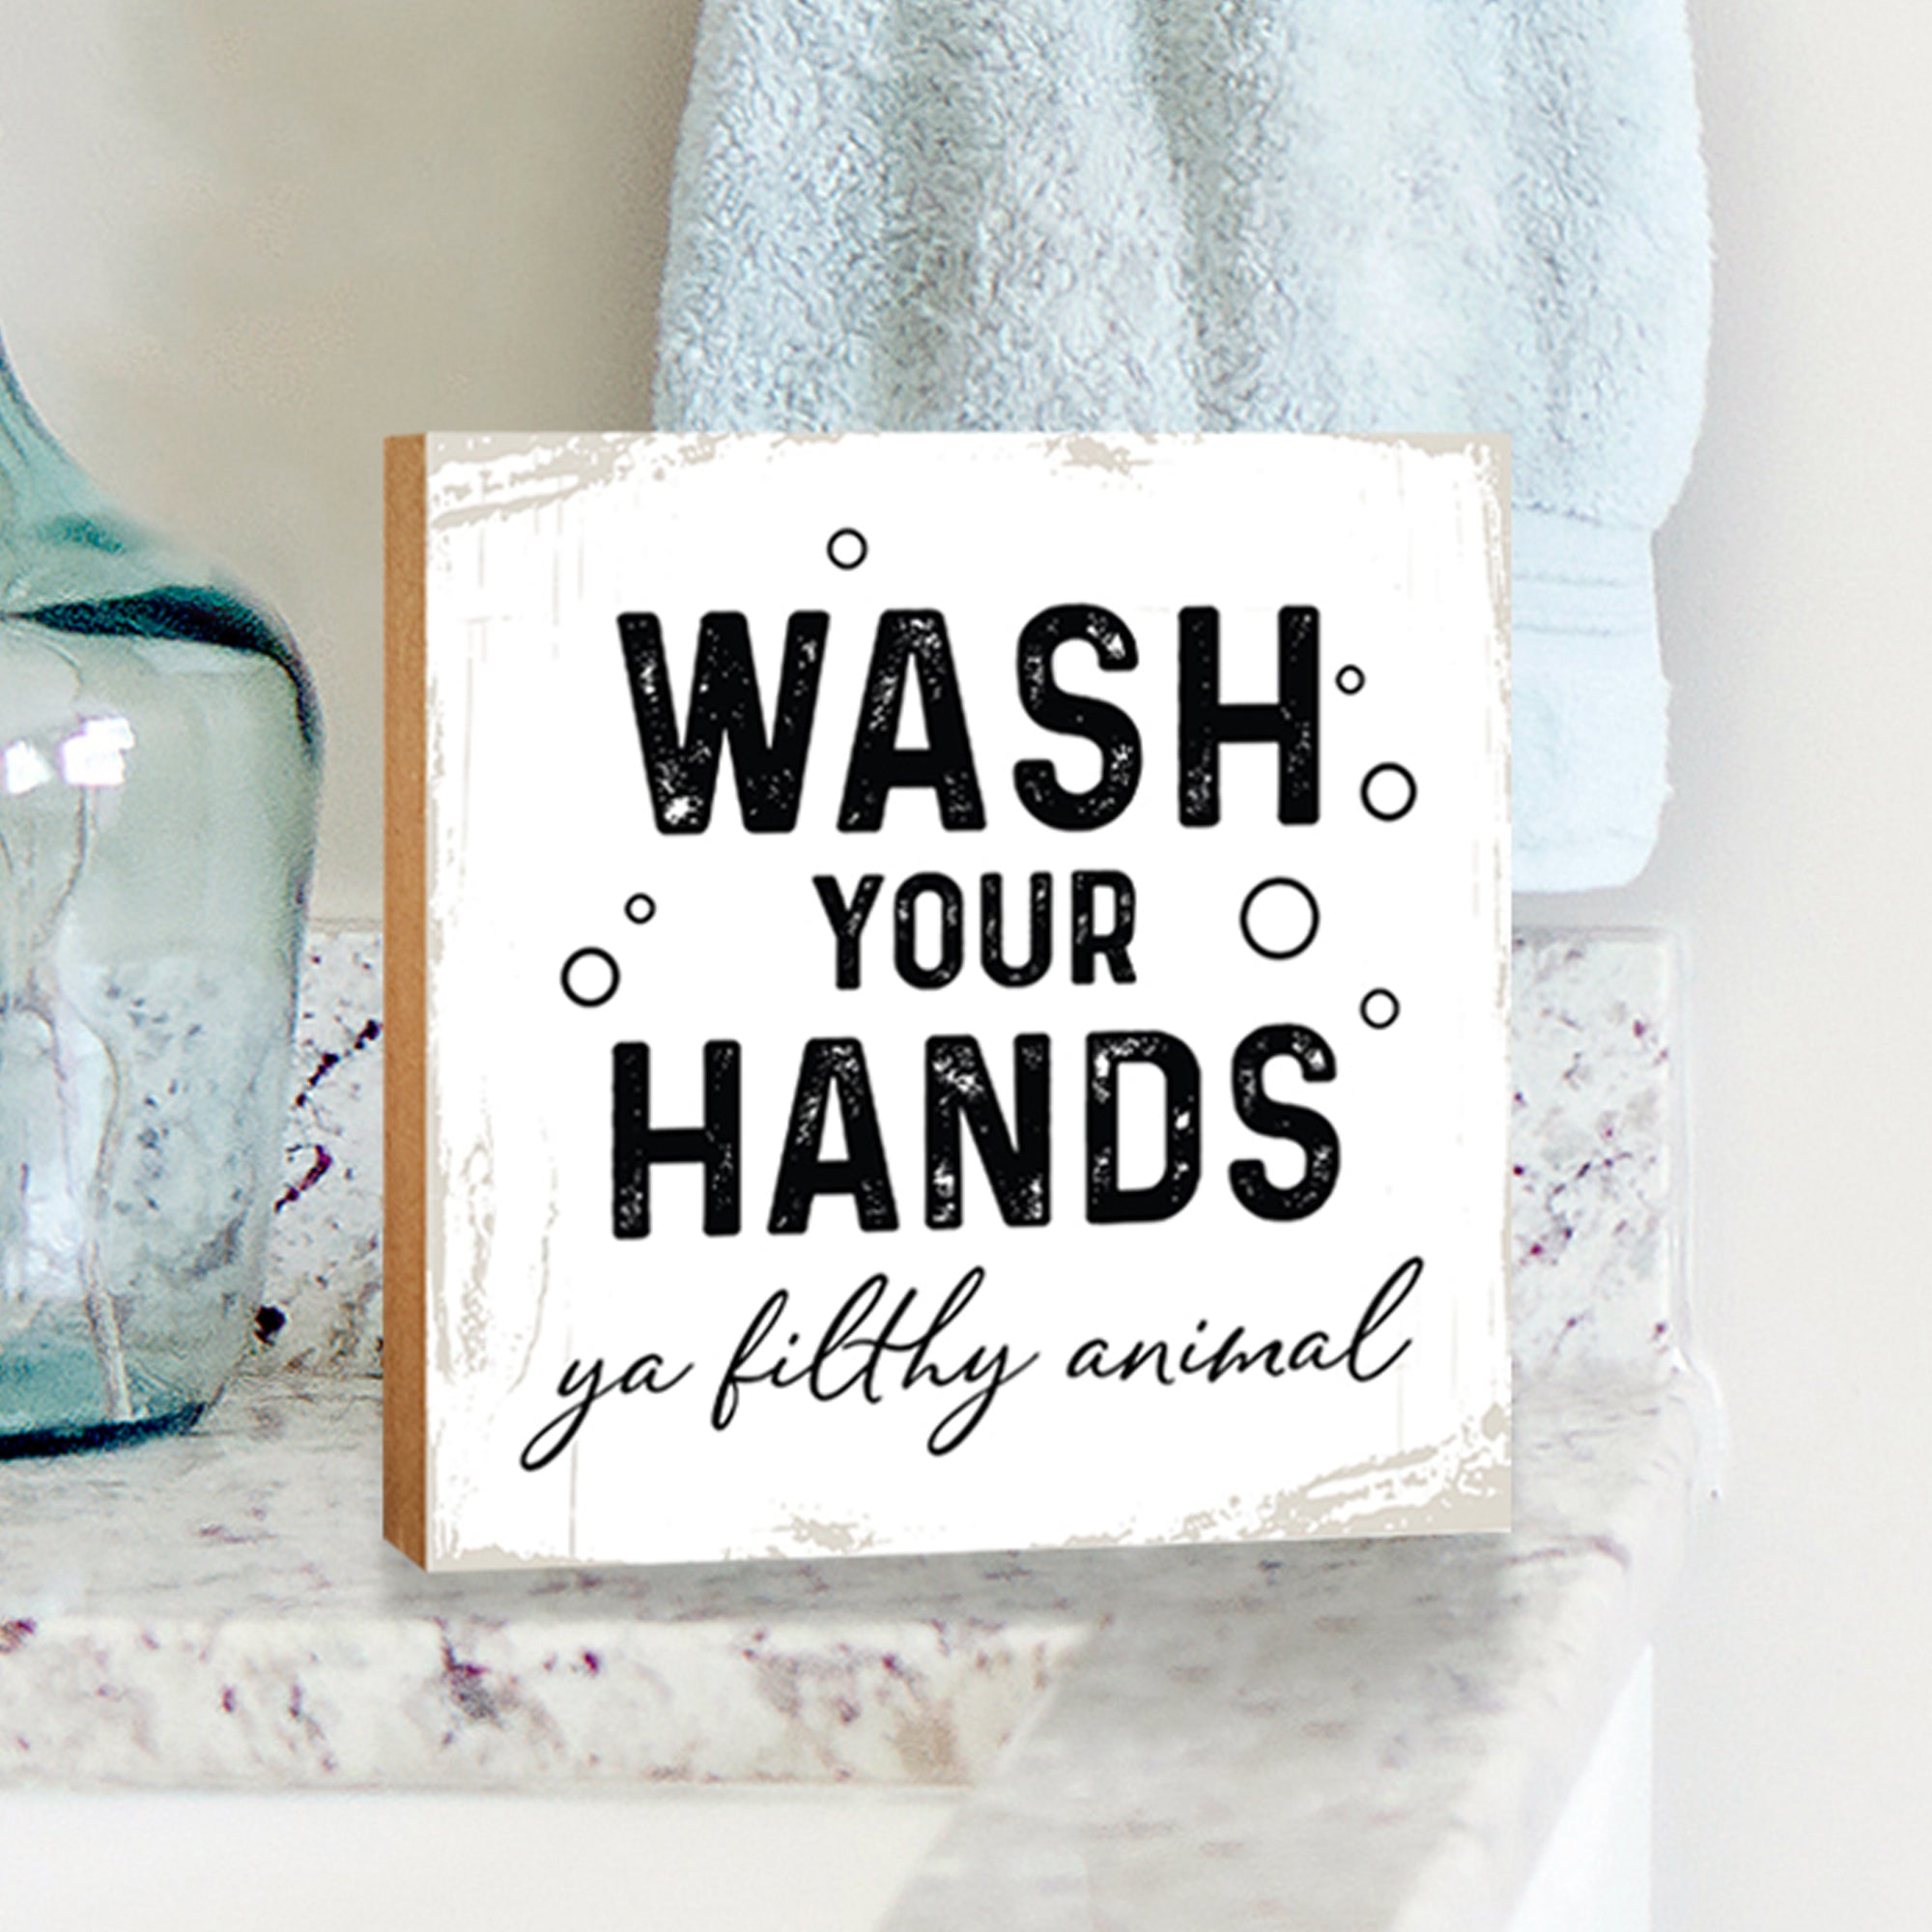 Wooden BATHROOM 6x6 Block shelf decor (Wash Your Hands) Inspirational Plaque Tabletop and Family Home Decoration